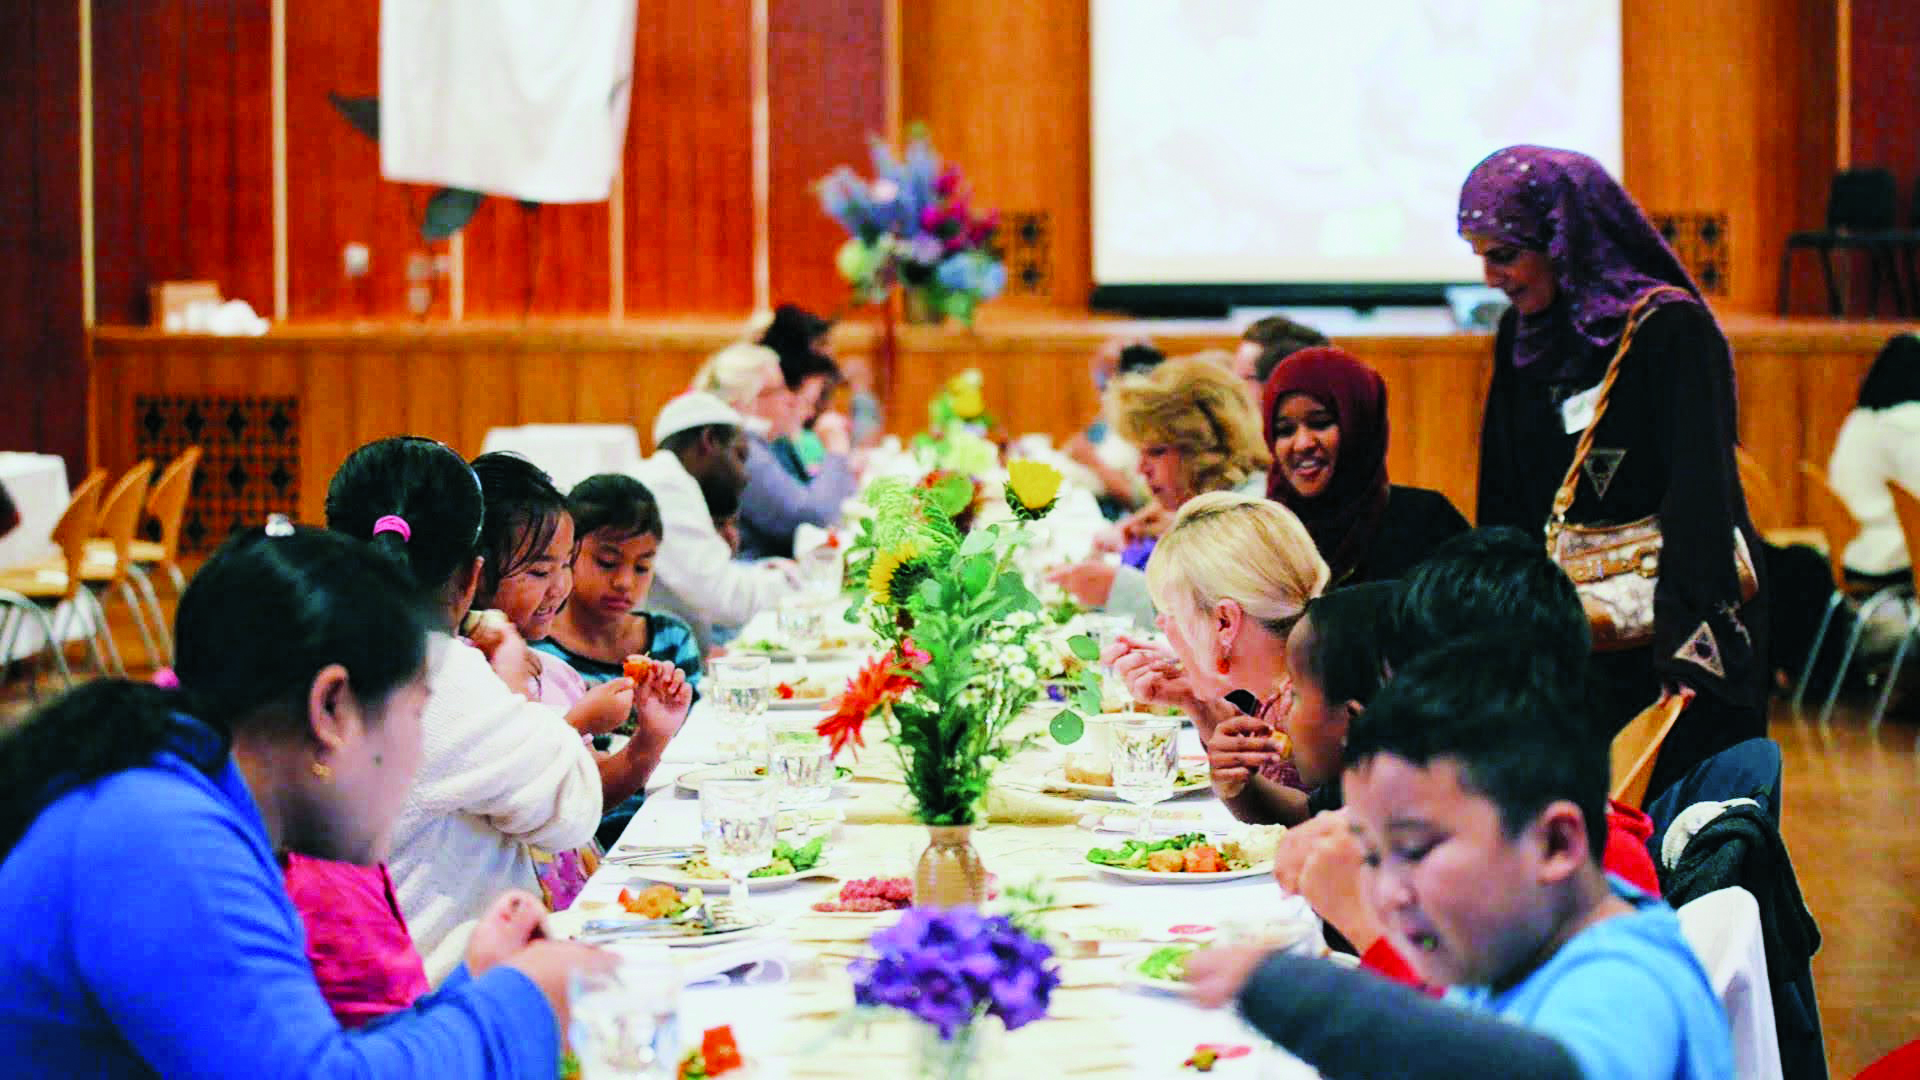 Children sit at a long table and eat